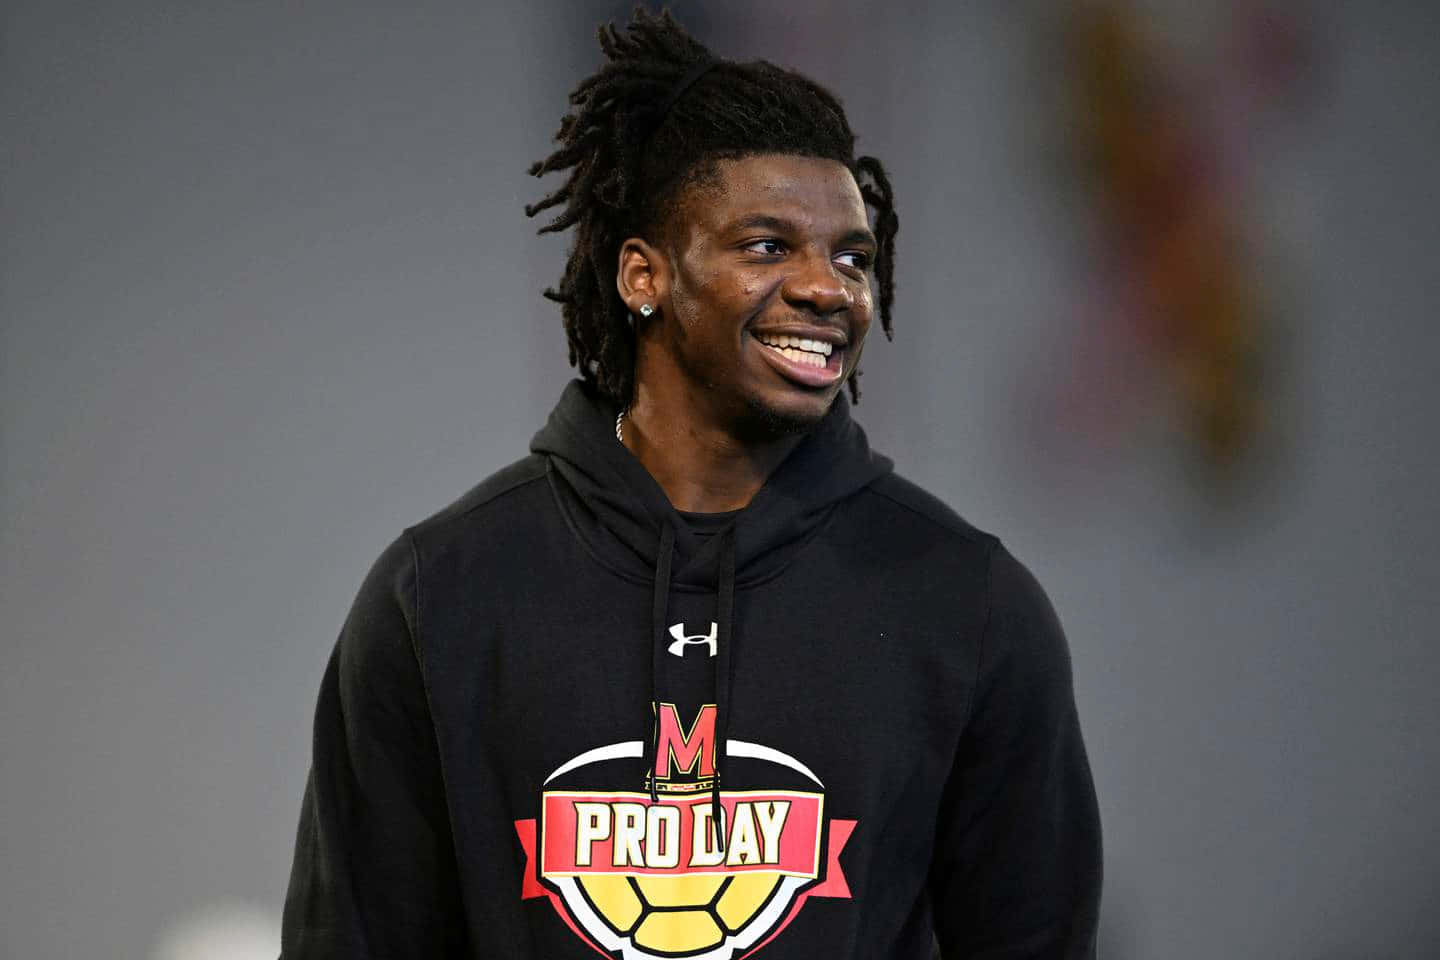 Athlete Smiling Pro Day Event Wallpaper